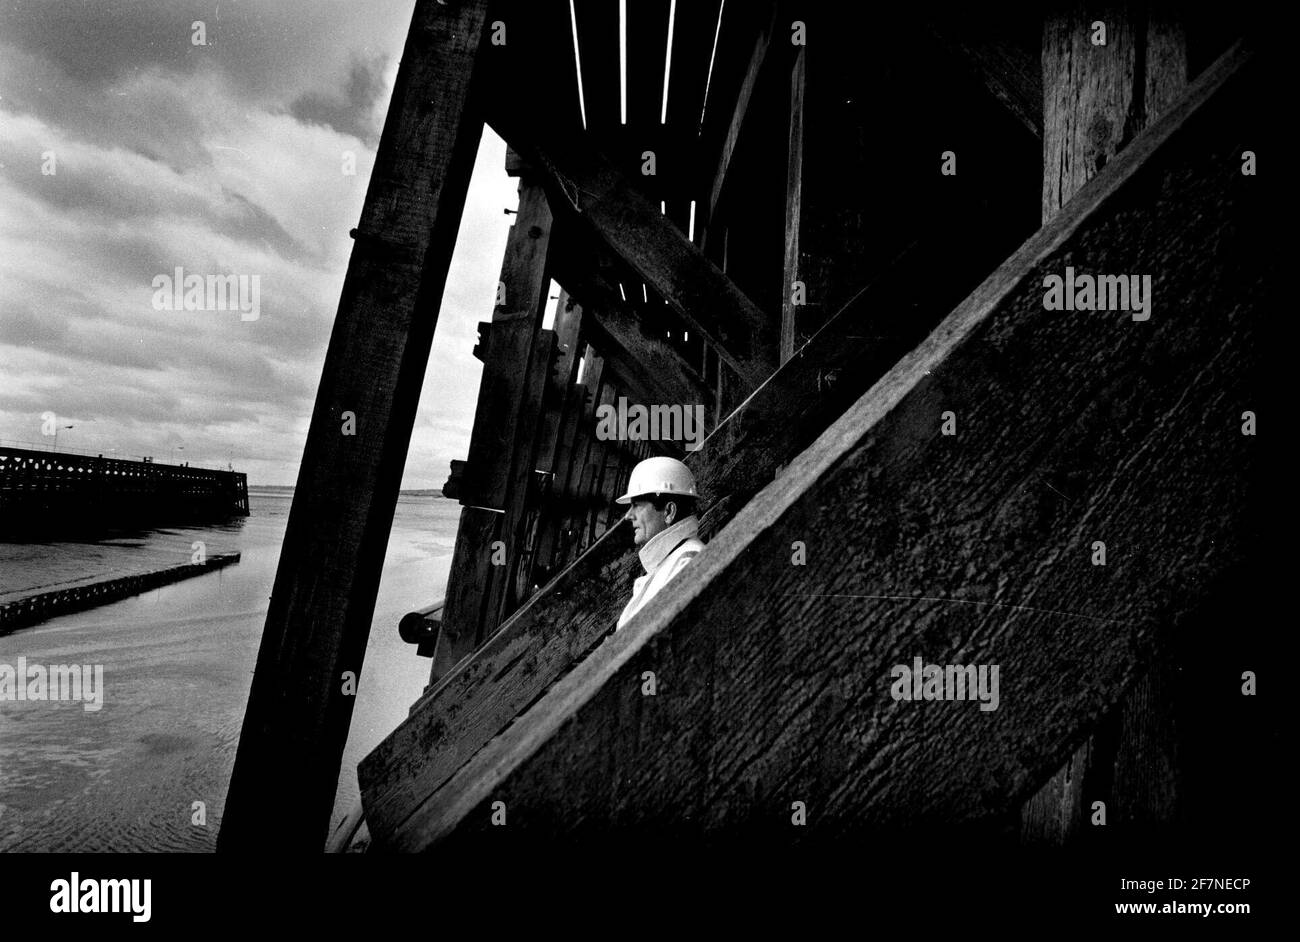 PHIL WHITE SITE SUPERVISOR INSPECTS THE OLD AND NEW TIMBERS OF SHARPNESS NORTH PIER WHICH DATES BACK TO 1870S AND IS UNDERGOING EXTENSIVE REPAIRS. BRITISH WATERWAYS WHO ARE UNDERTAKING THE WORK ARE USING HUGE GREENHEART TIMBERS  TO REPAIR THE PIER. Stock Photo